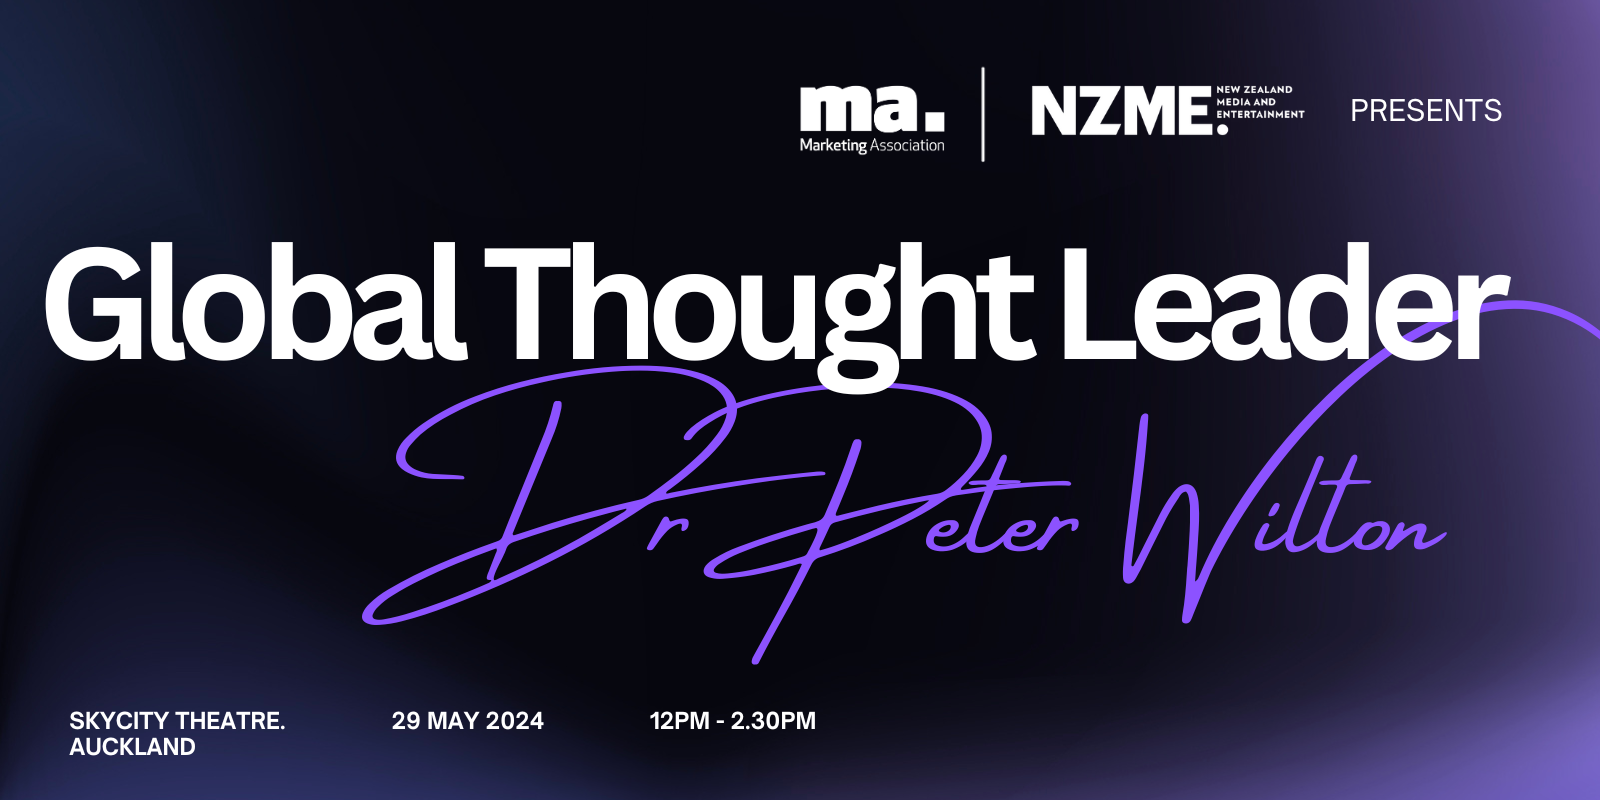 An Exclusive Audience with Global Thought Leader Dr Peter Wilton